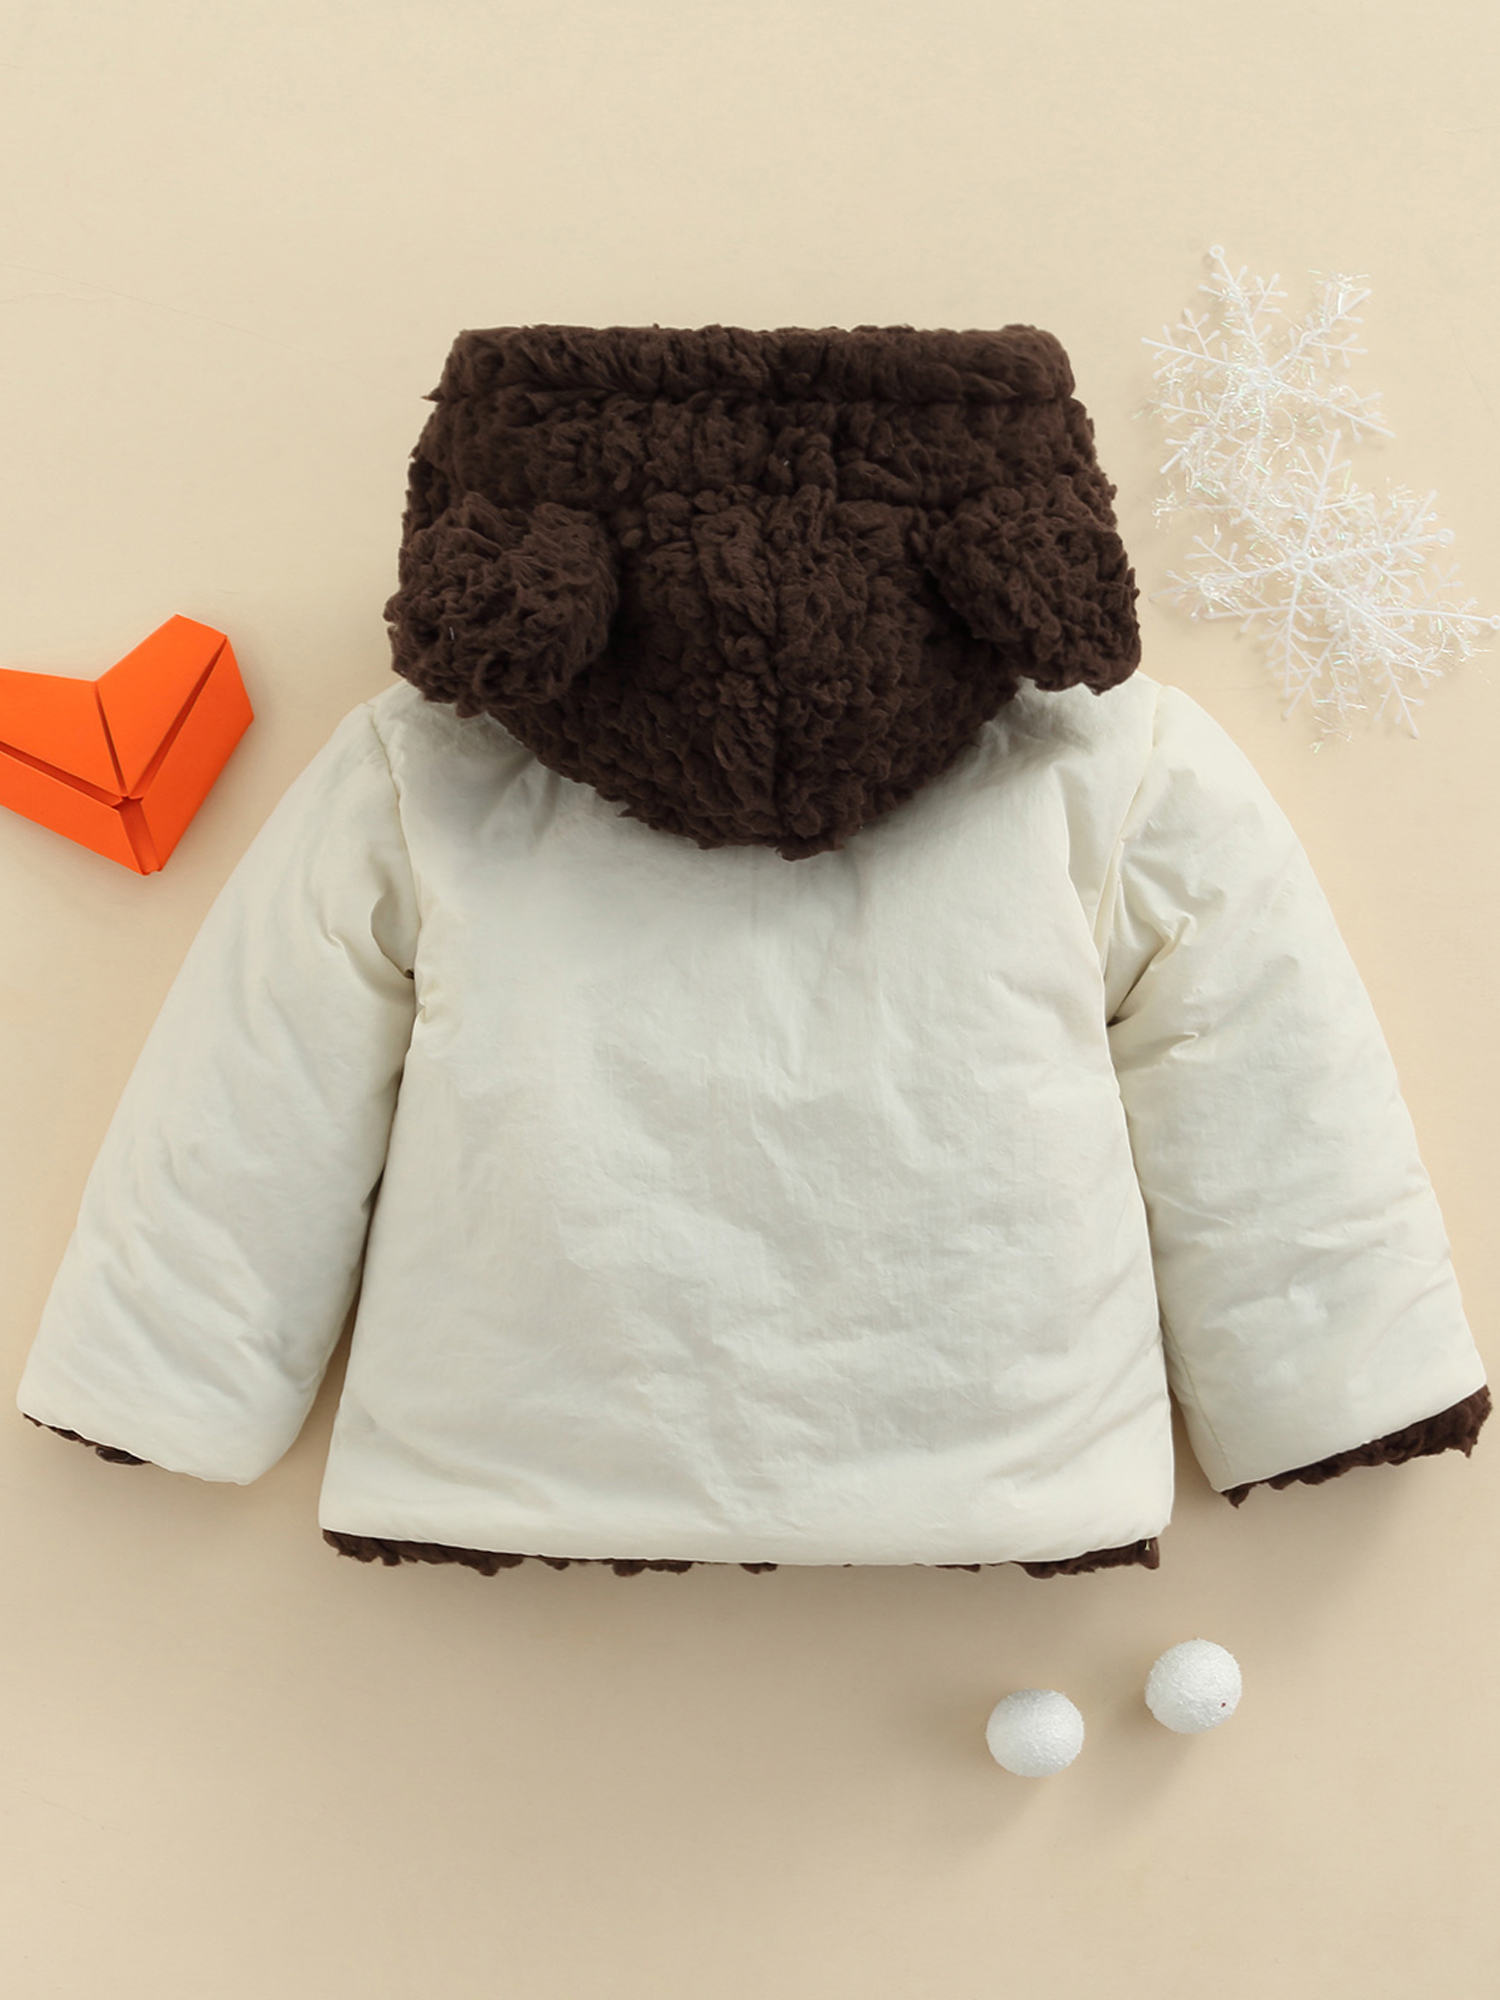 Pudcoco Baby Winter Hooded Coat Long Sleeve Button-down Wadded Jacket - image 2 of 6